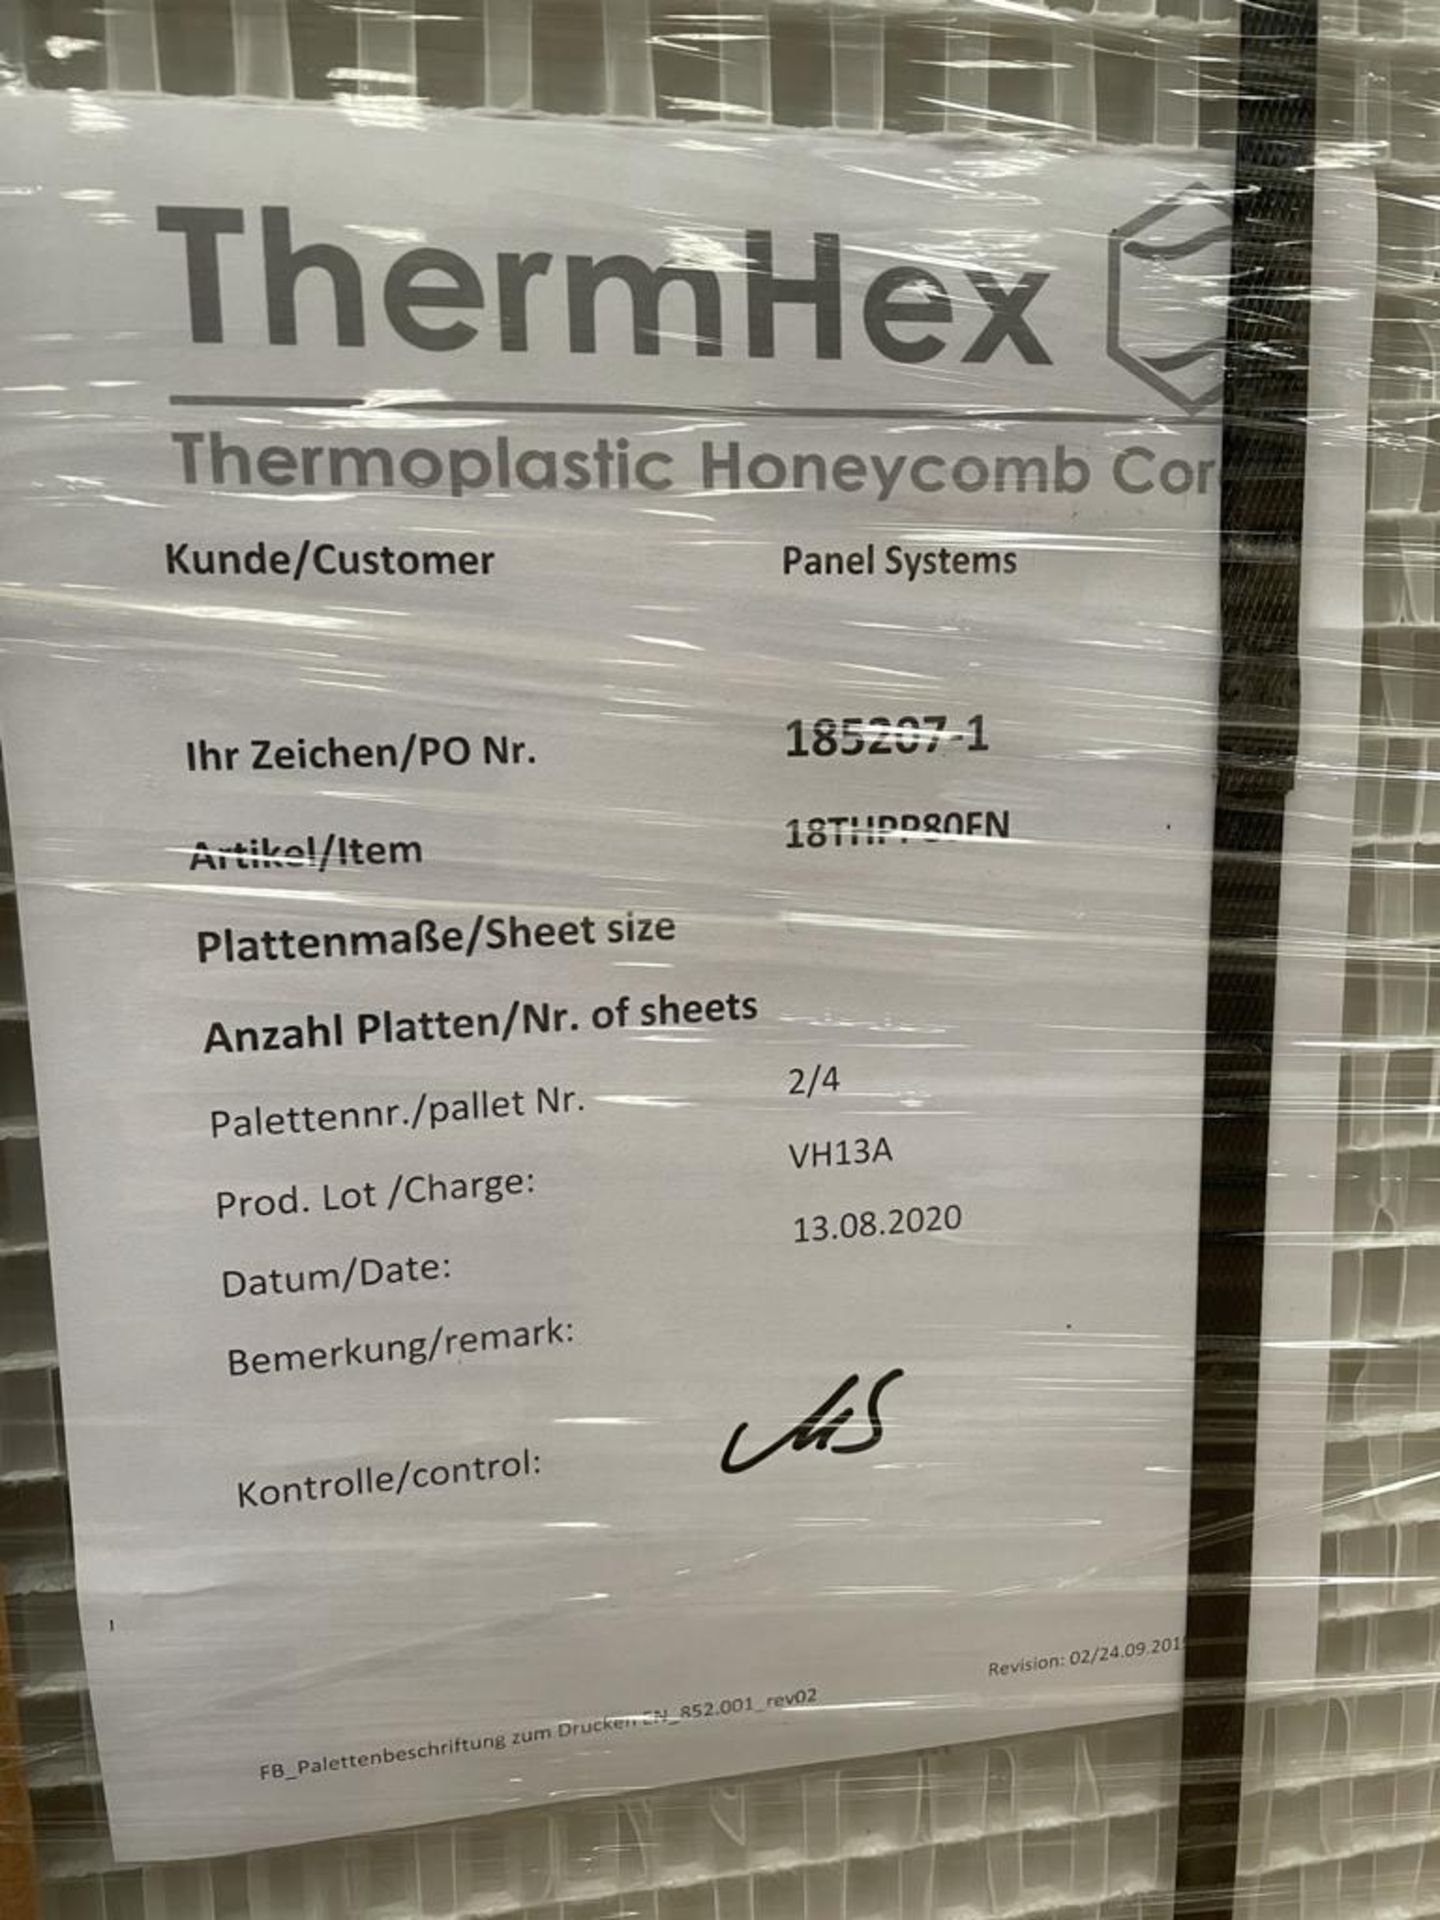 100 x ThermHex Thermoplastic Honeycomb Core Panels - Size: 3558 x 1215 x 20mm - New Stock - Lightwei - Image 7 of 7